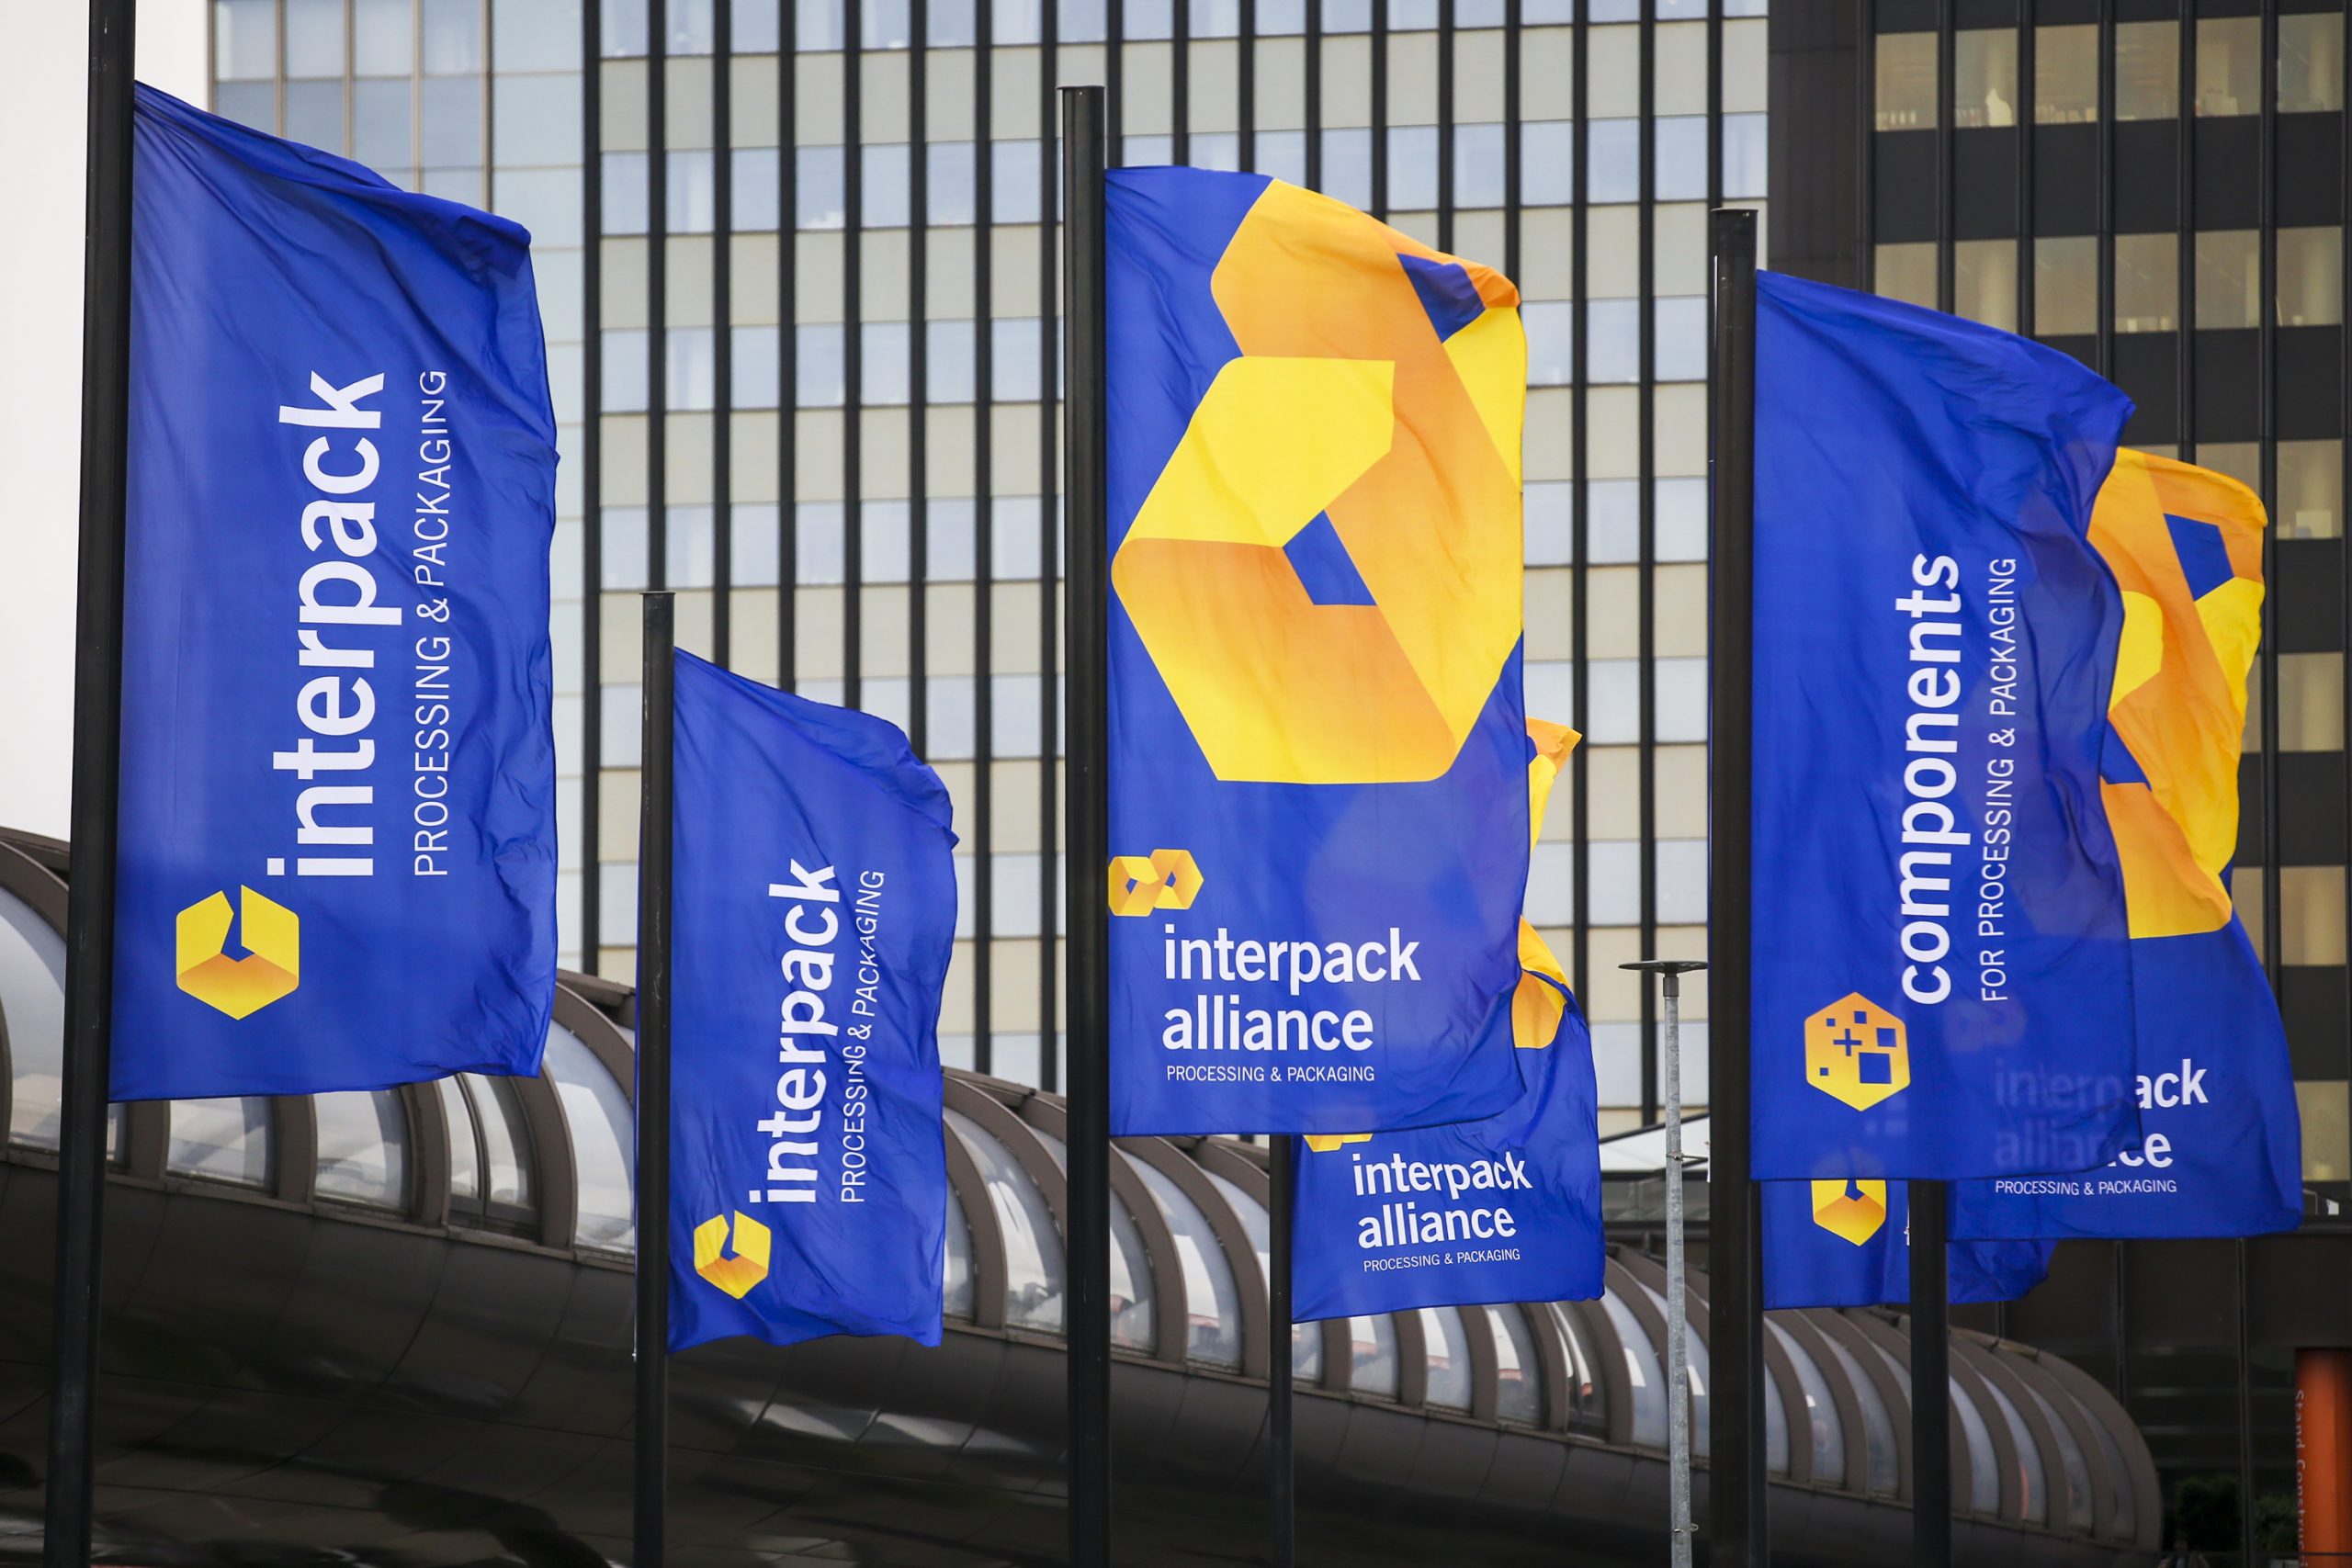 New date for interpack trade show announced